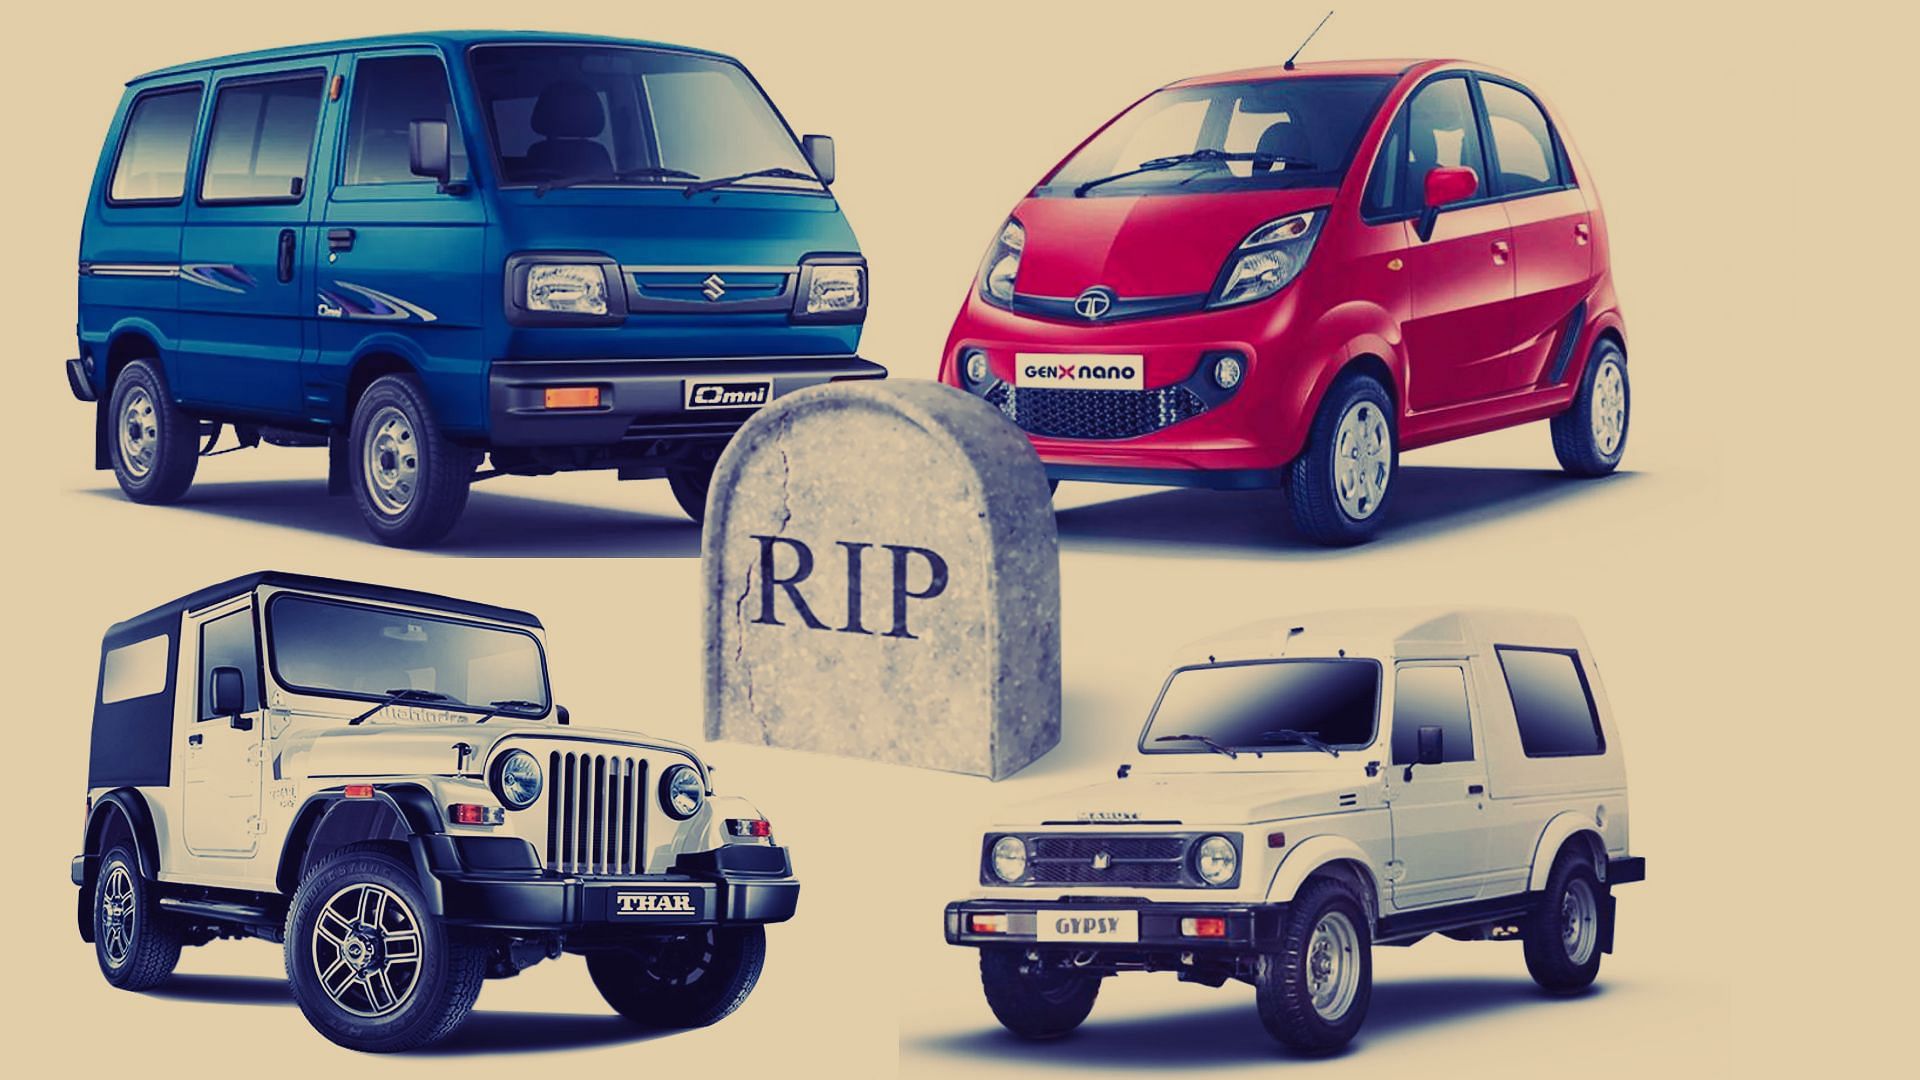 Many iconic Indian cars will cease to exist in 2019, but some will bounce back.&nbsp;